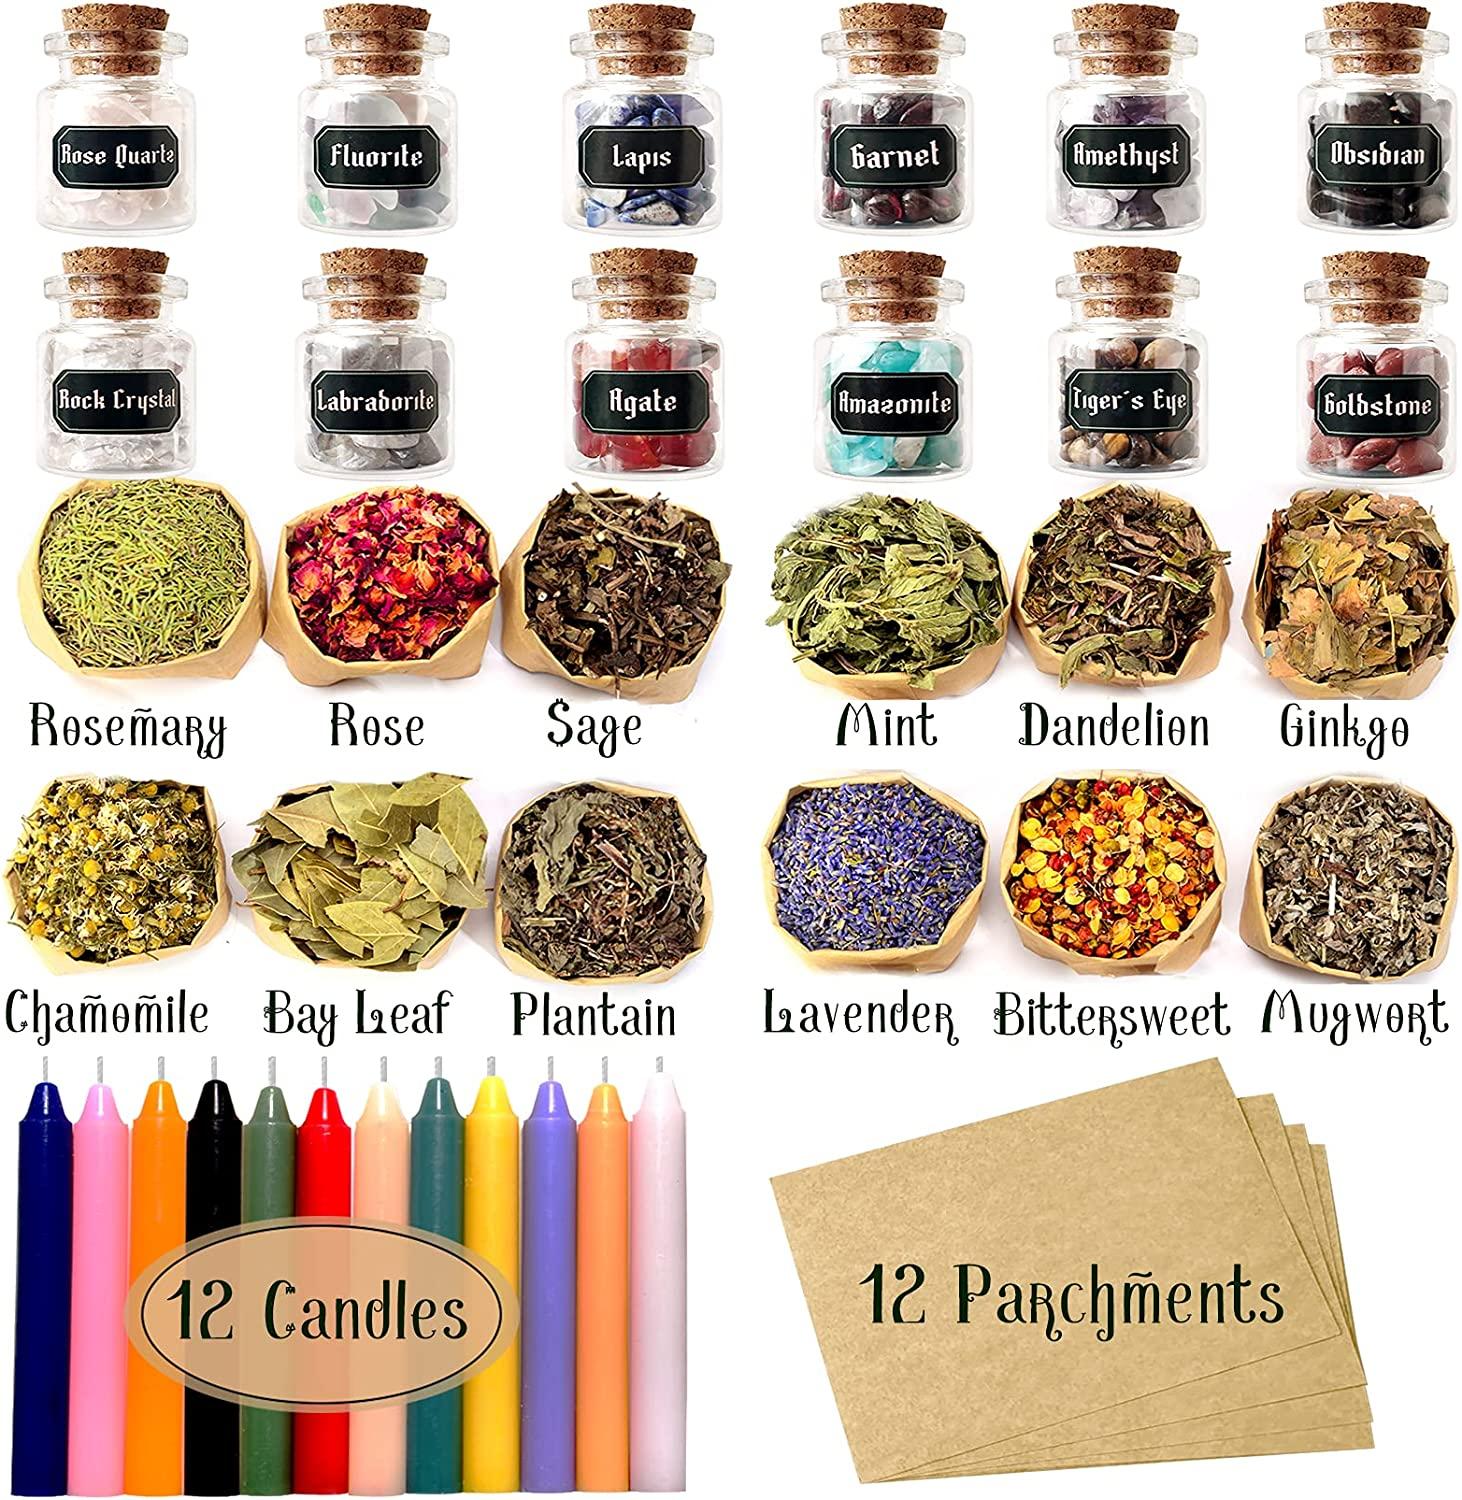 Dried Herbs Witchcraft Supplies, 22 Natural Witch Herbs for Spells with  Magical Uses, Wiccan Supplies and Tools, Beginner Witchcraft Kit Magic Herbs  kit Witch Stuff for Pagan, Wiccan Rituals, Voodoo 22 Packs